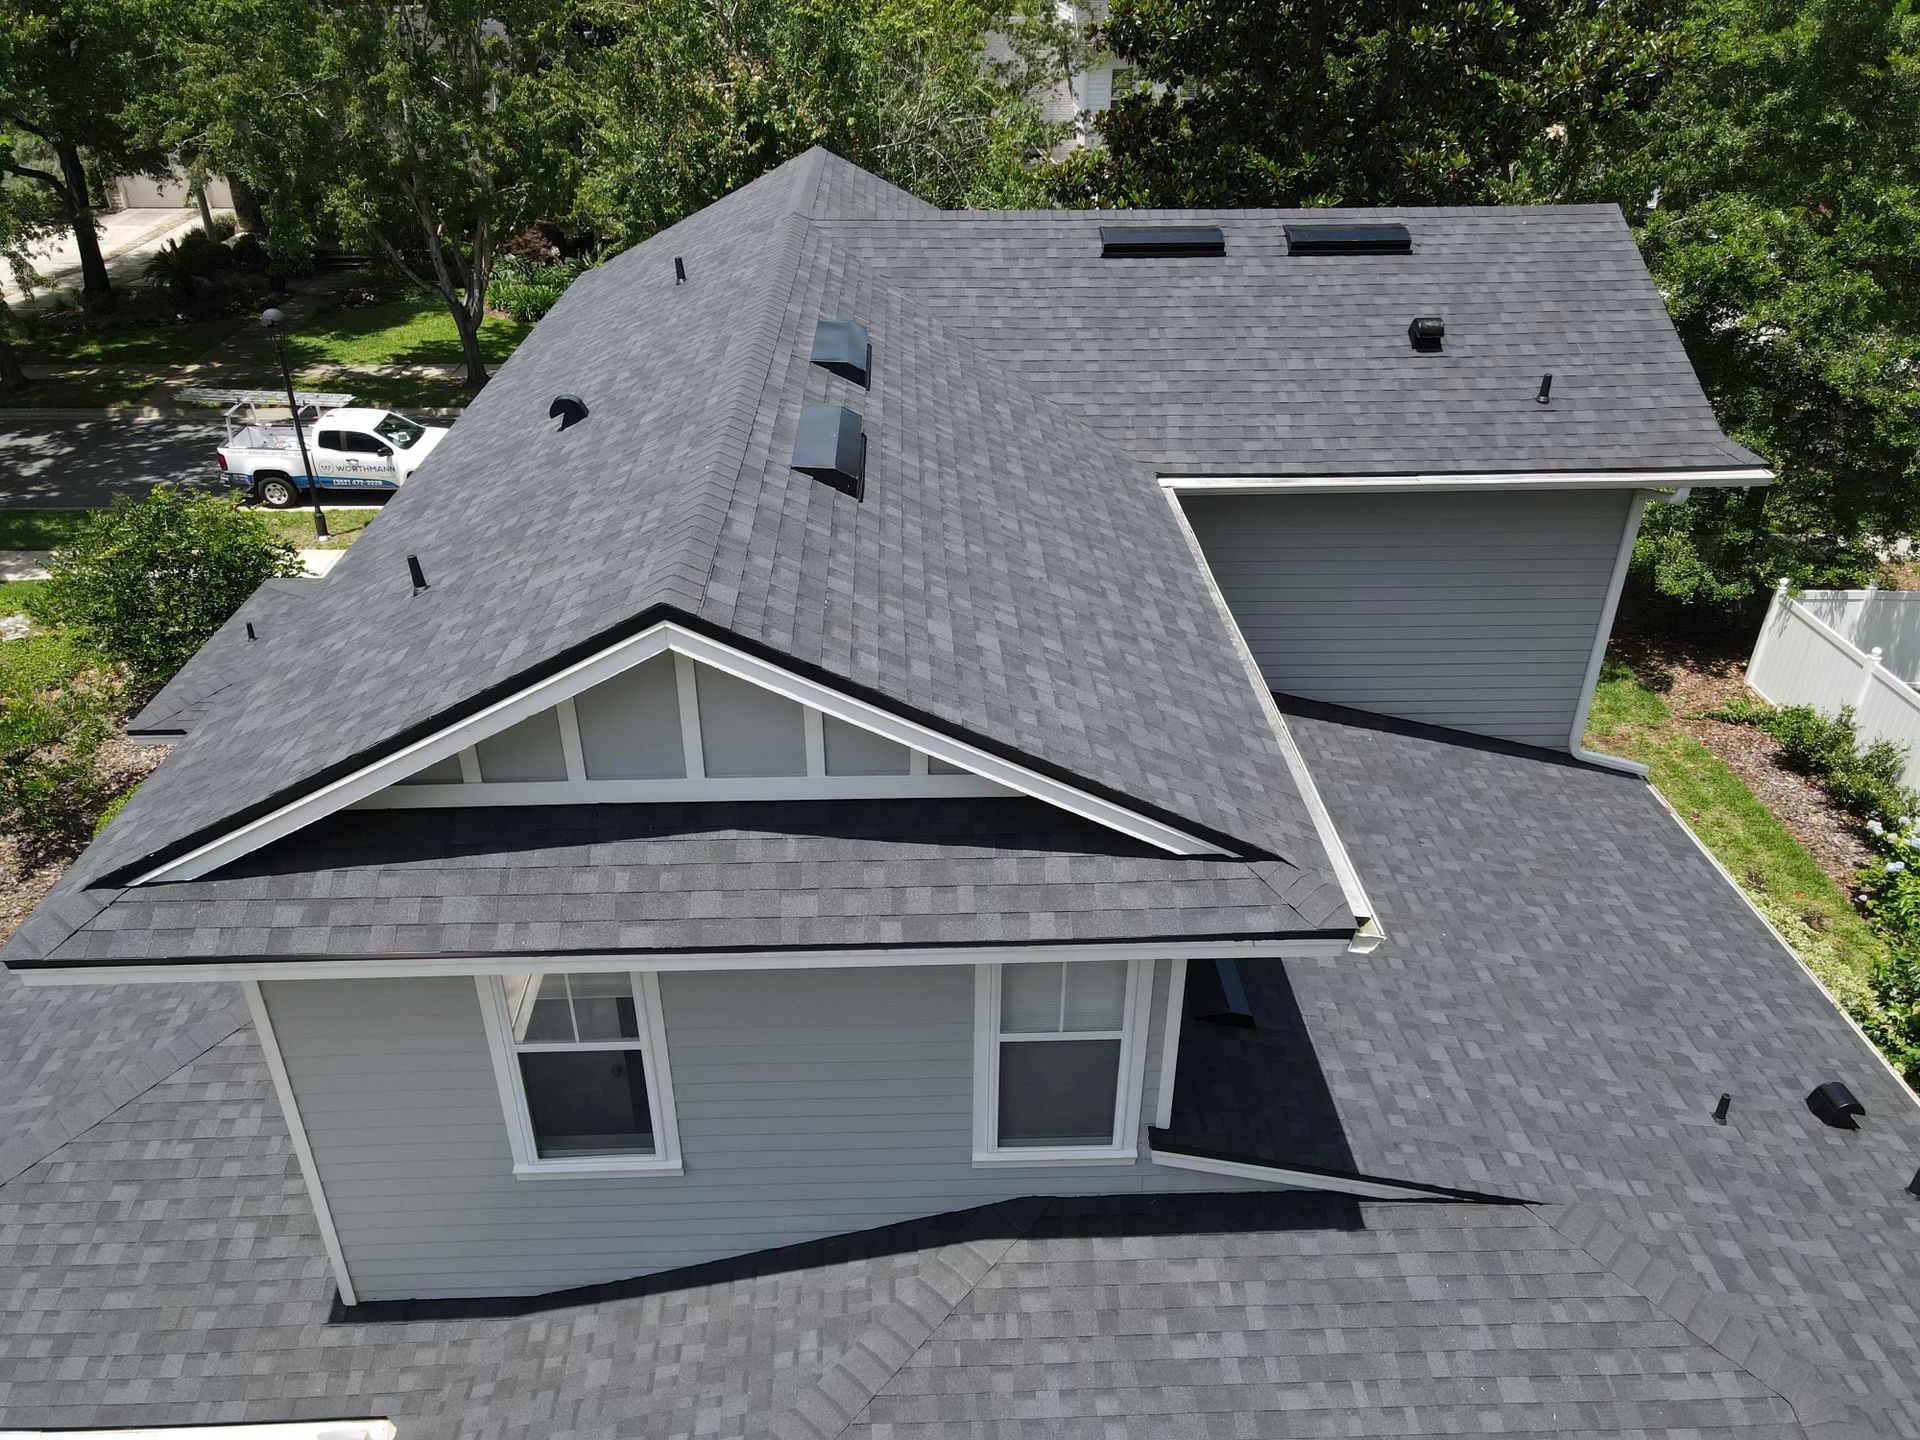 Aerial view of a house with a gray roof and white trim. The roof is made of new gray toned-shingles. The roof looks very neat and brand new.